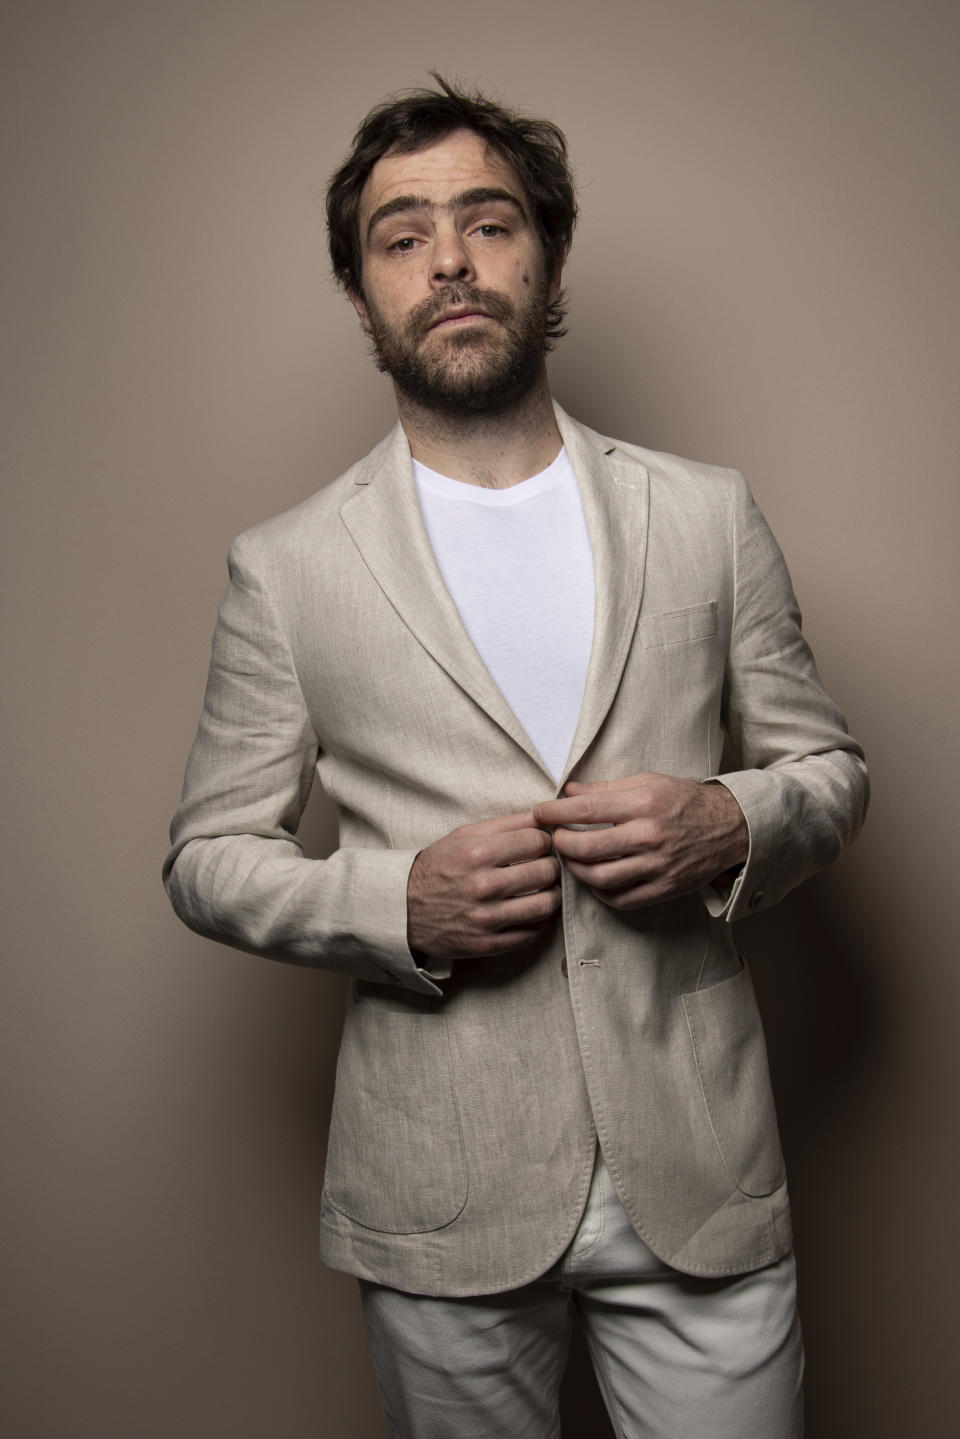 Juan Pedro Lanzani poses for portraits to promote the film "Argentina, 1985" during the 79th edition of the Venice Film Festival in Venice, Italy, on Sept. 4, 2022. (Photo by Vianney Le Caer/Invision/AP)